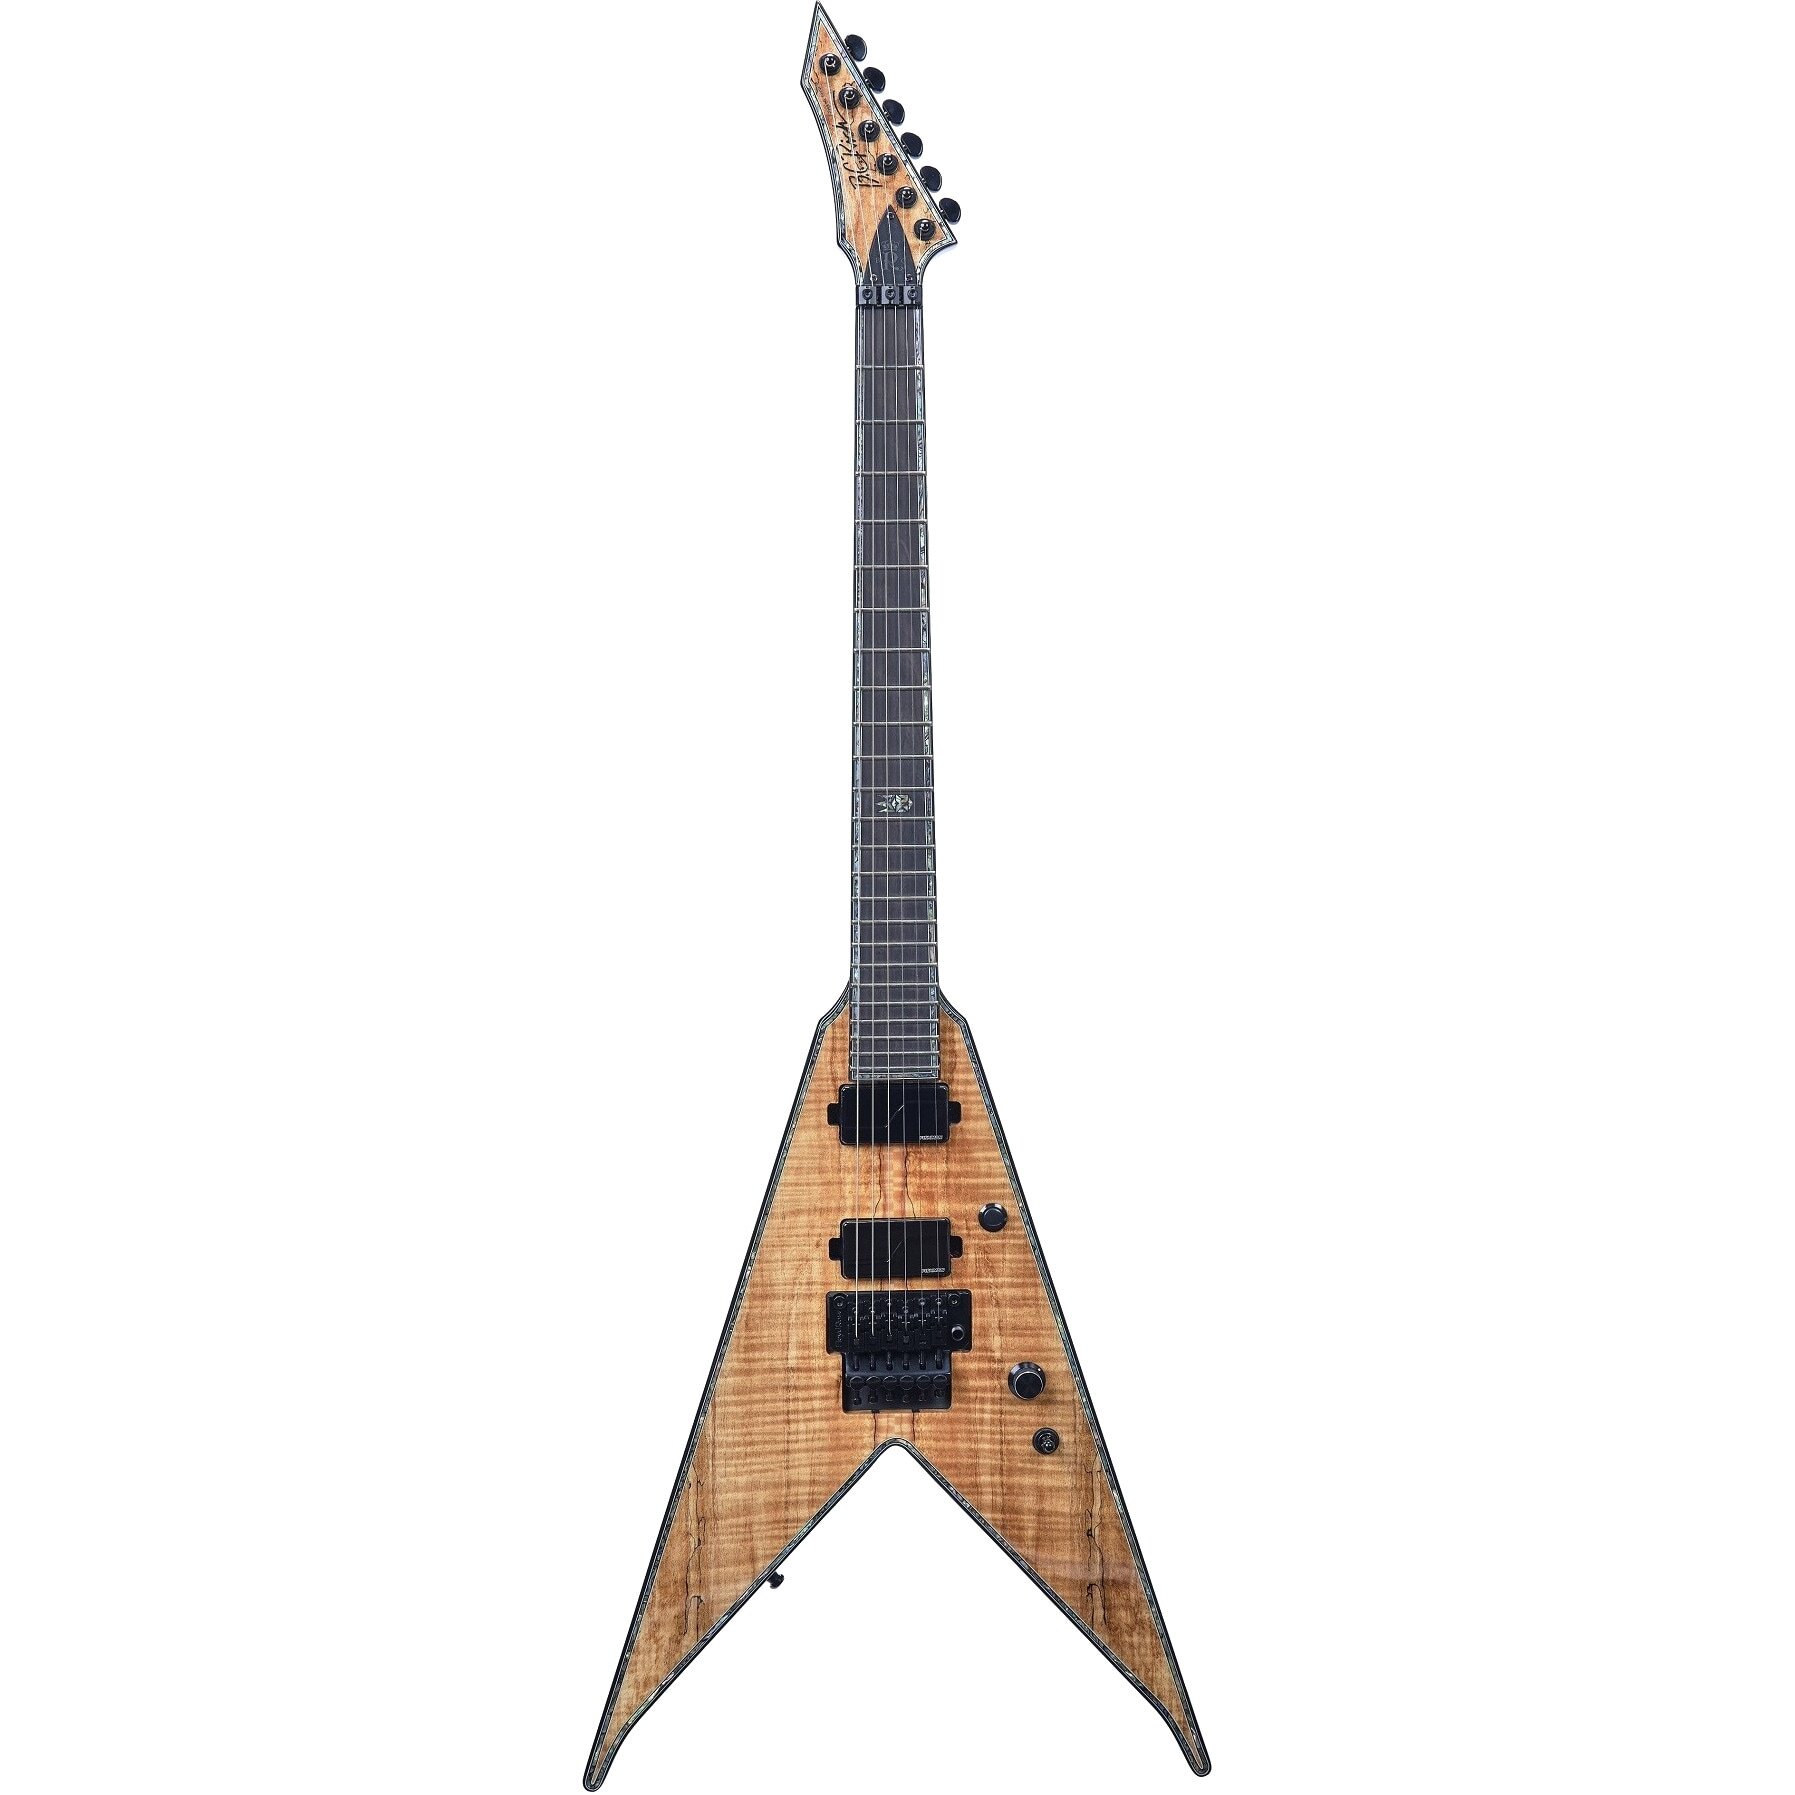 B.C. Rich JRV Extreme Exotic Spalted Maple